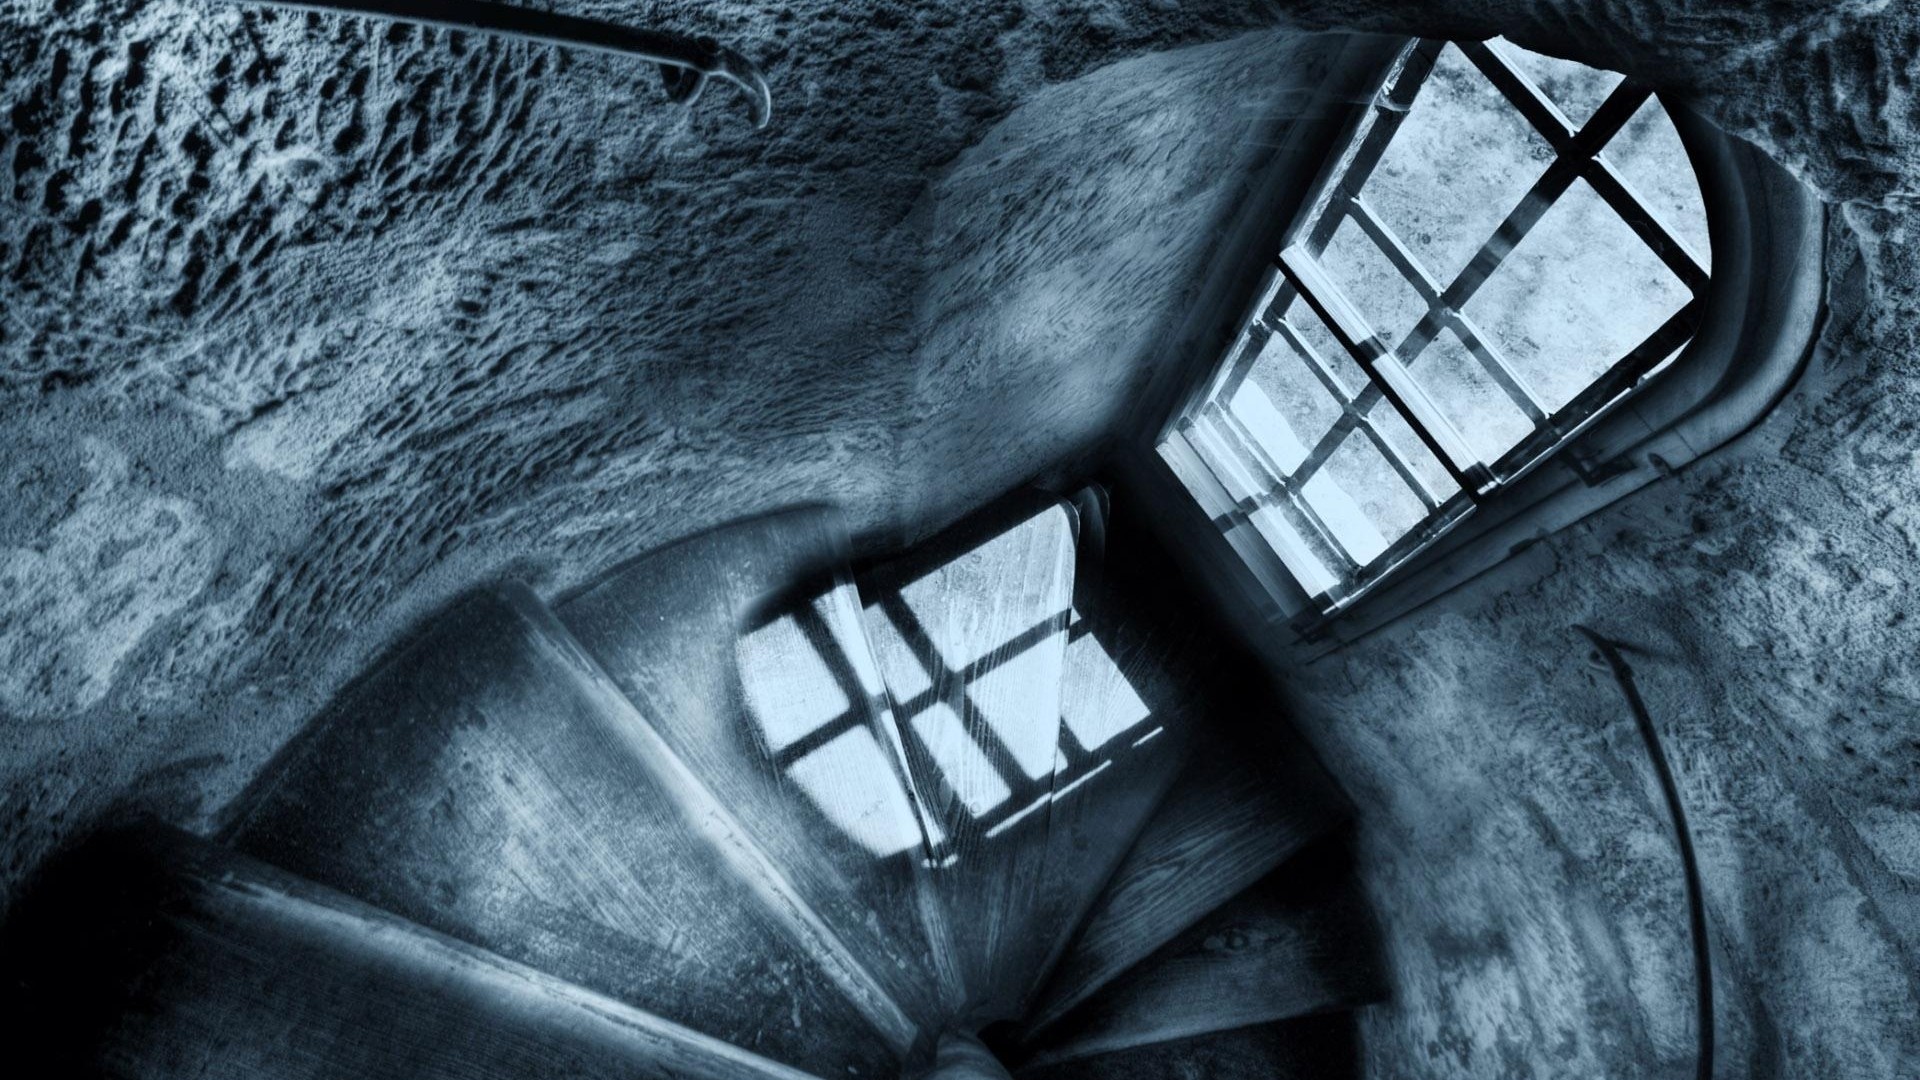 General 1920x1080 architecture building HDR window stairs shadow indoors monochrome